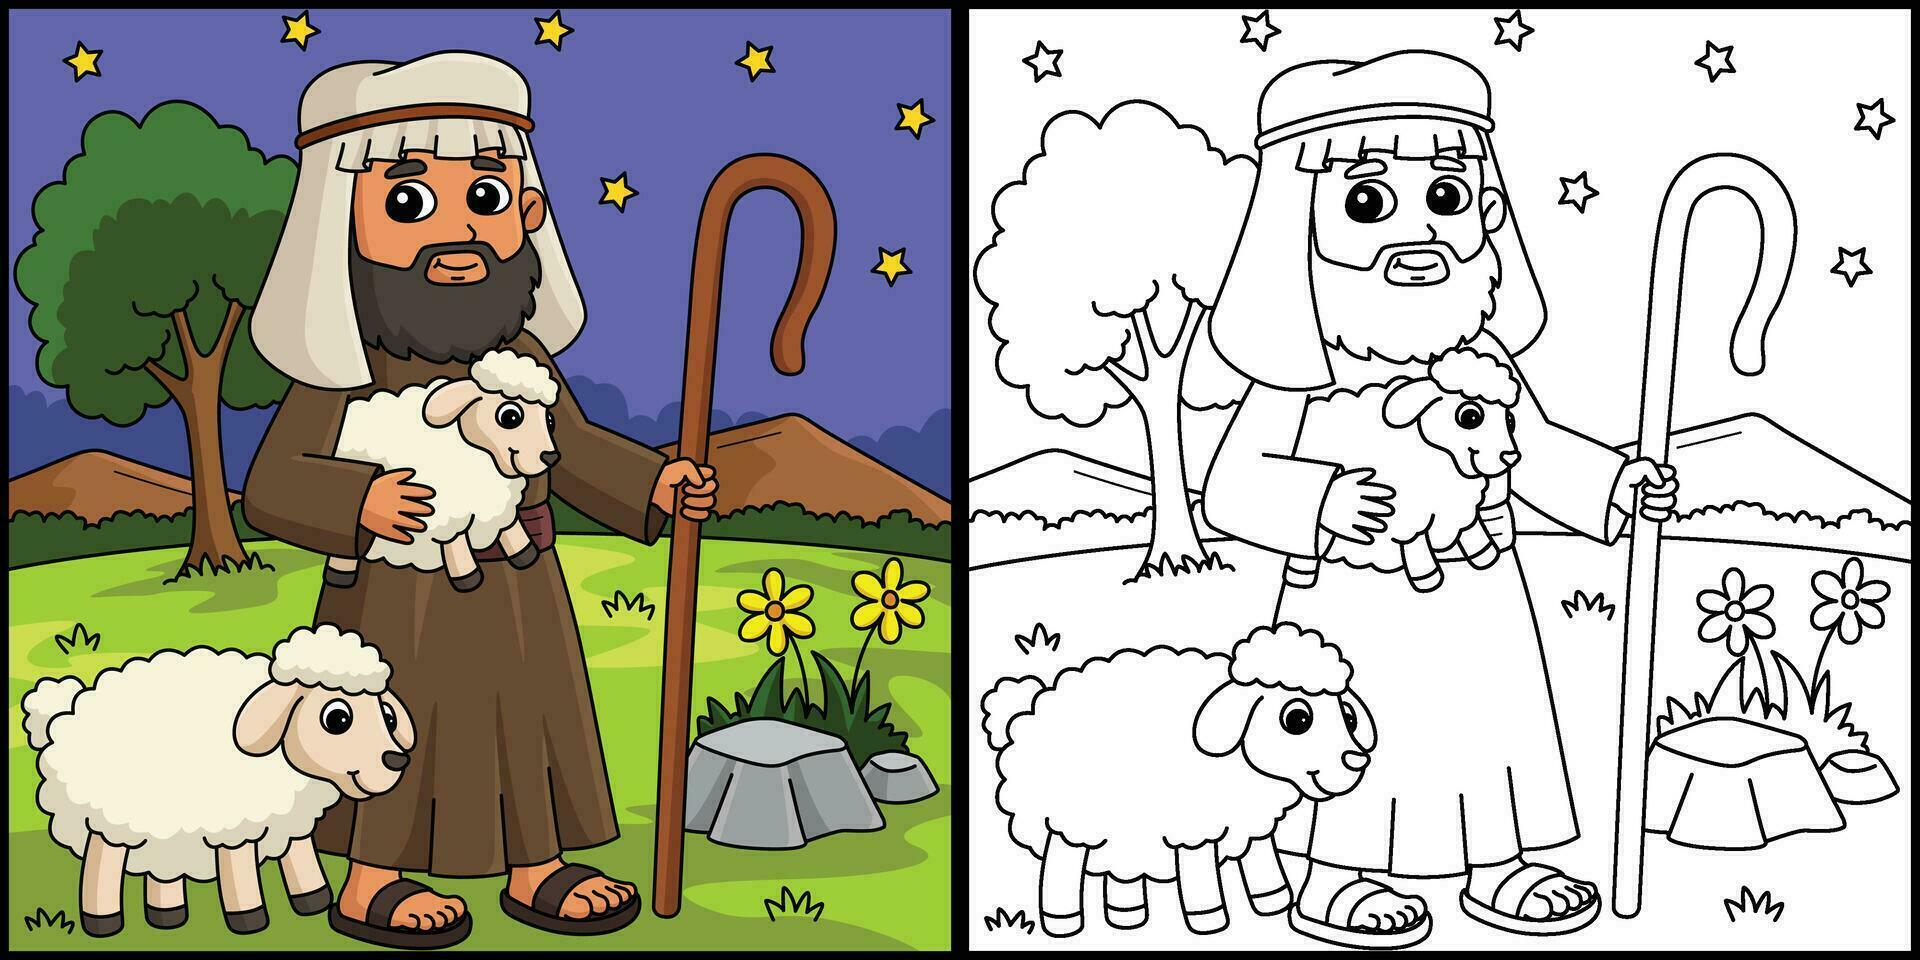 Christian Shepherd Coloring Page Illustration vector